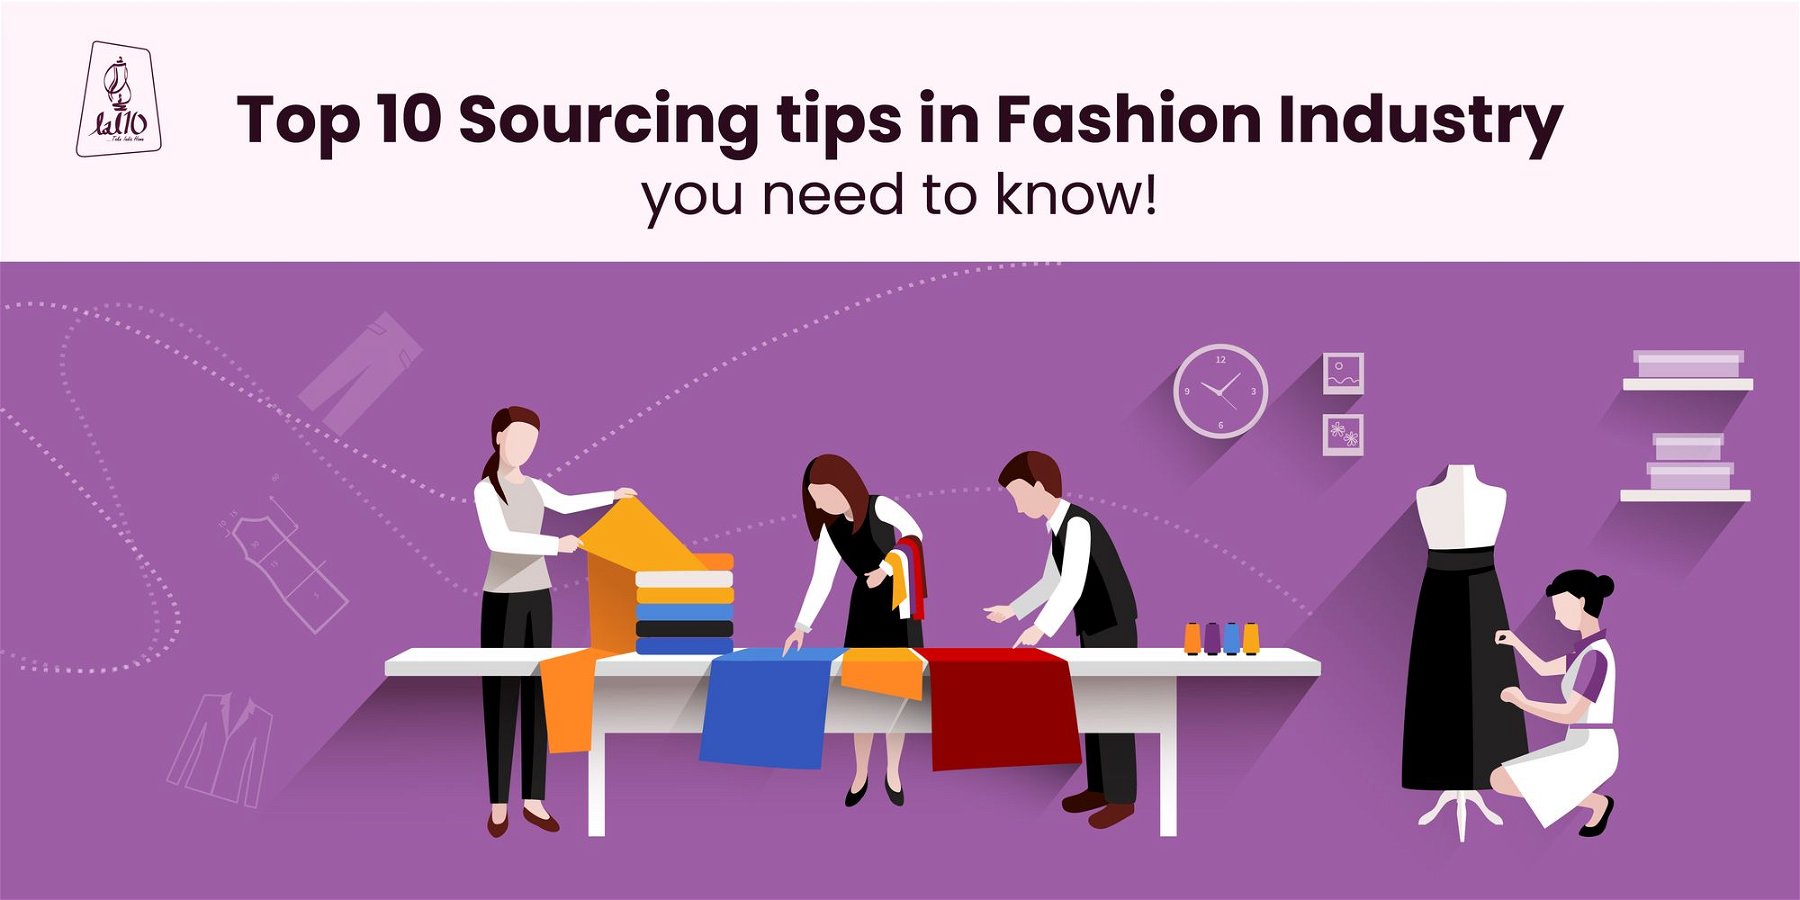 Top 10 sourcing tips in fashion industry you need to know